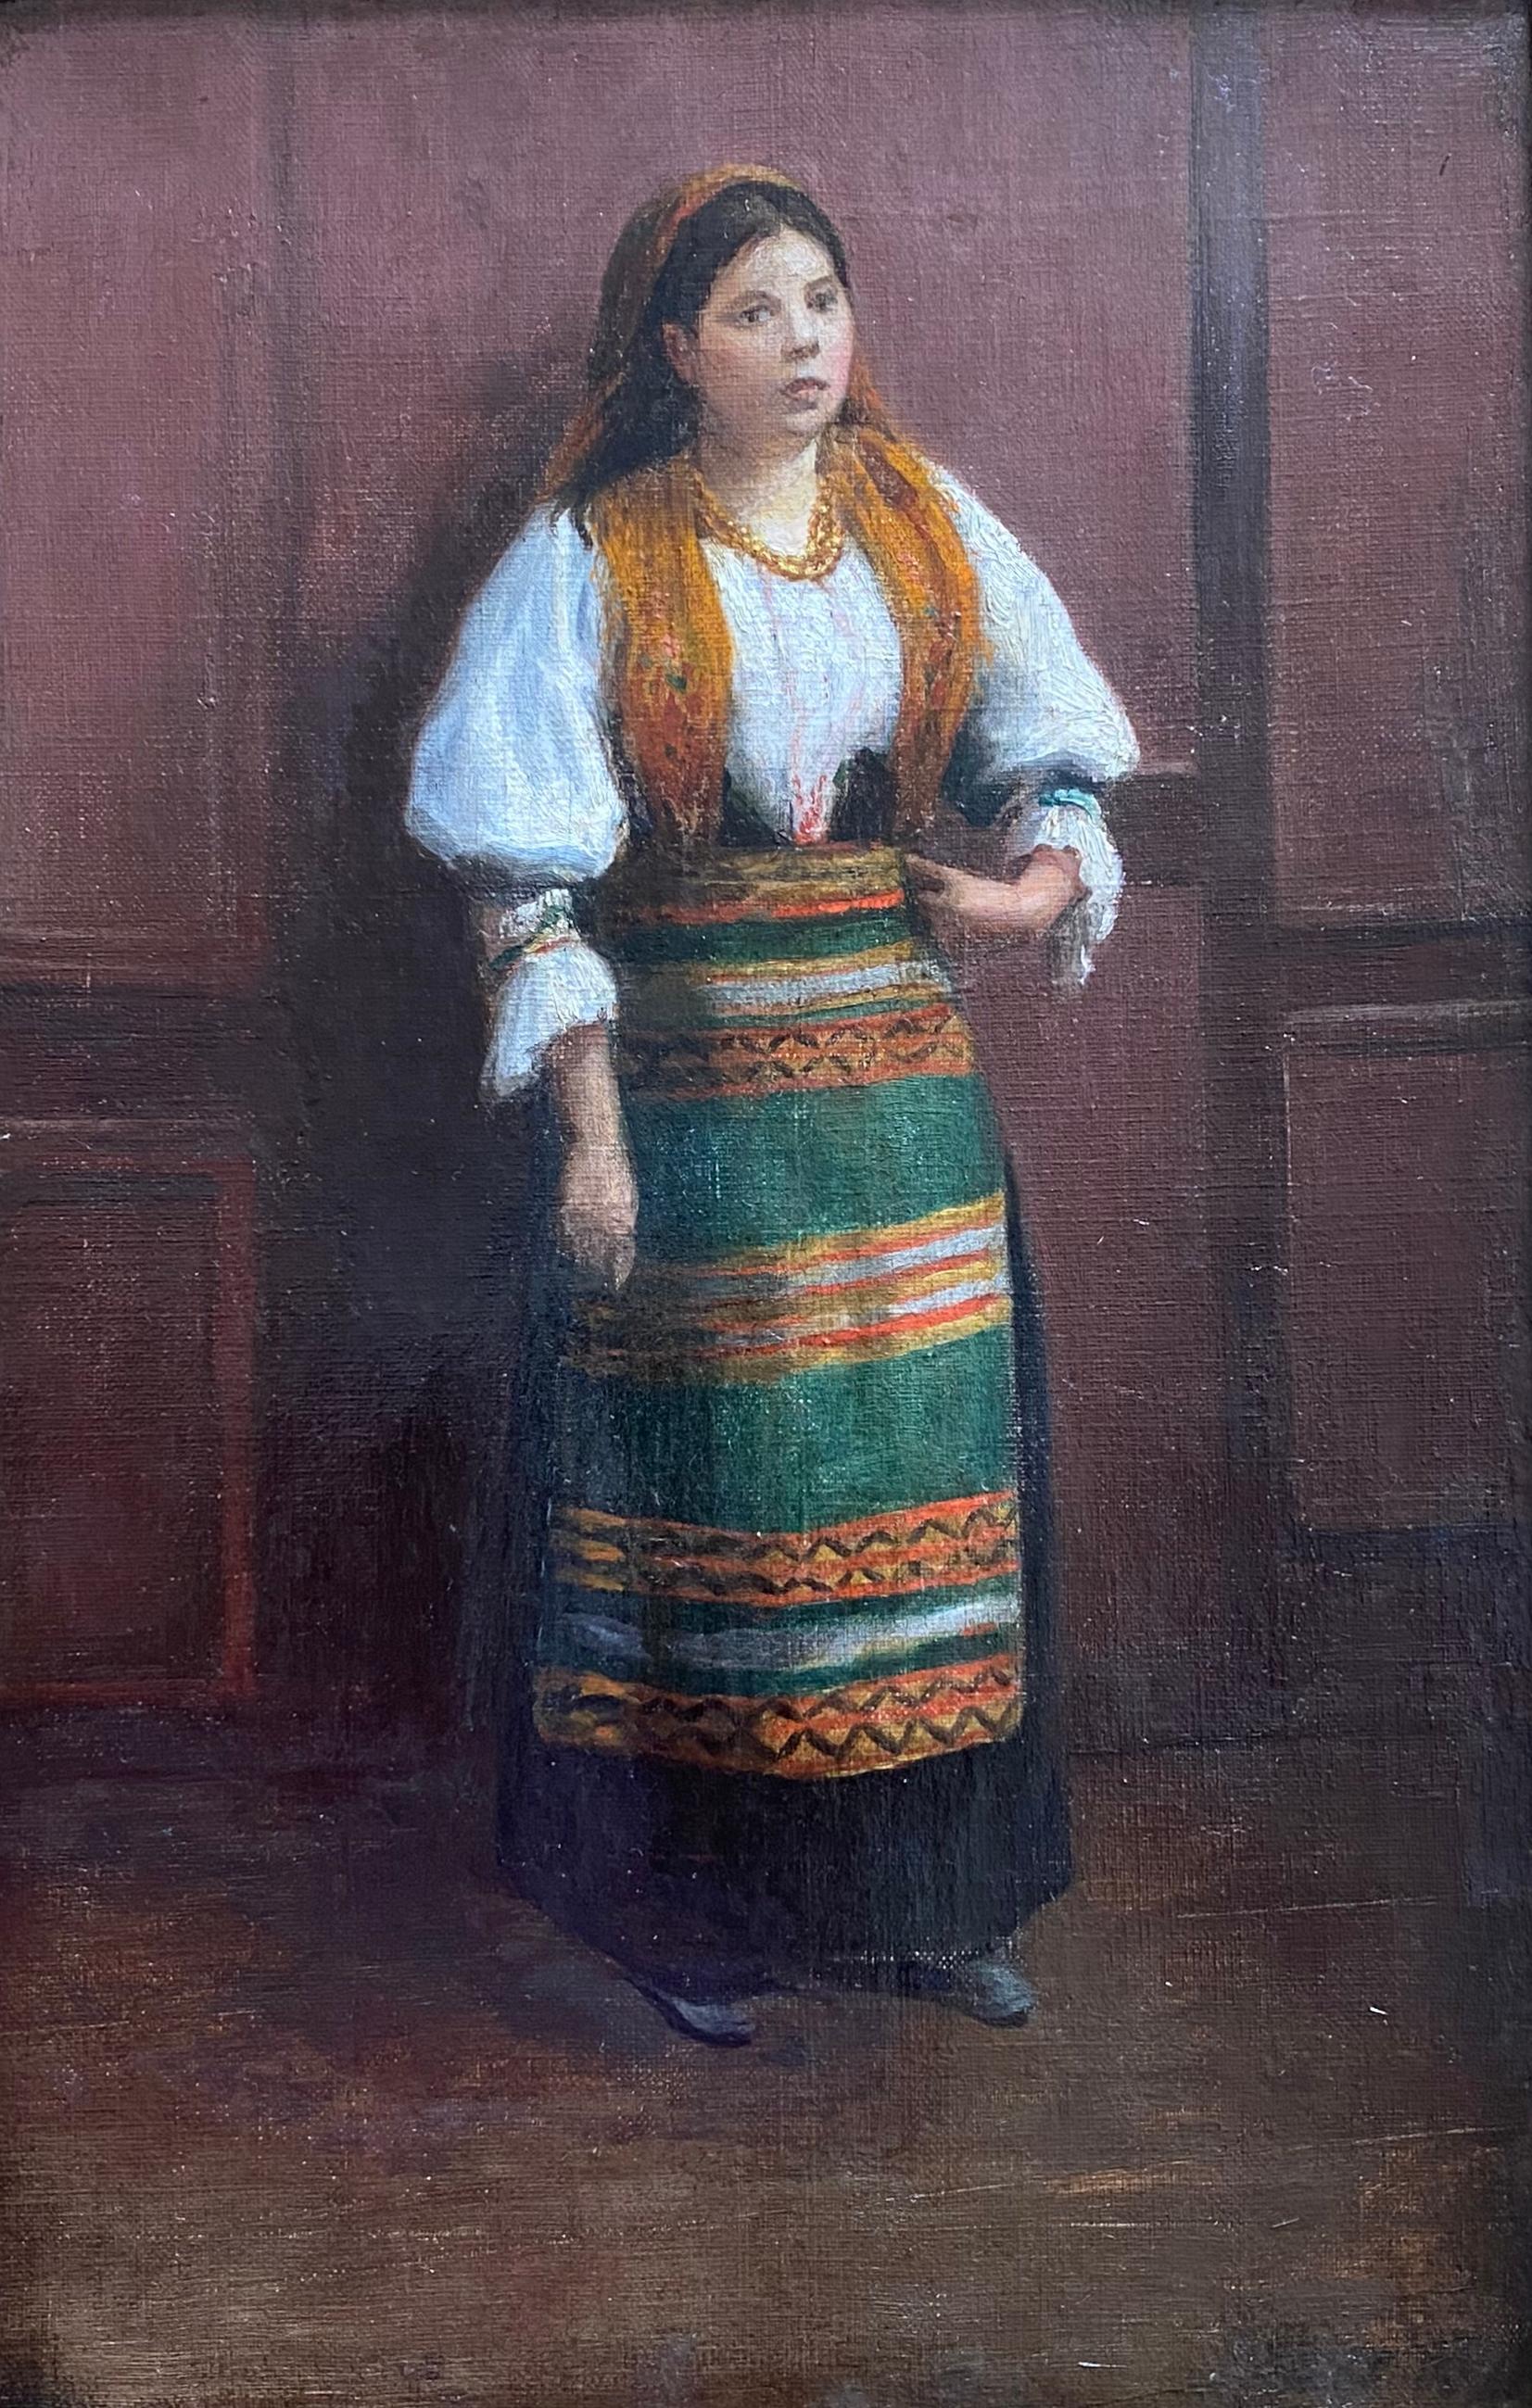 The first time model: the enigmatic young bohemian girl in traditional dress   - Painting by Unknown